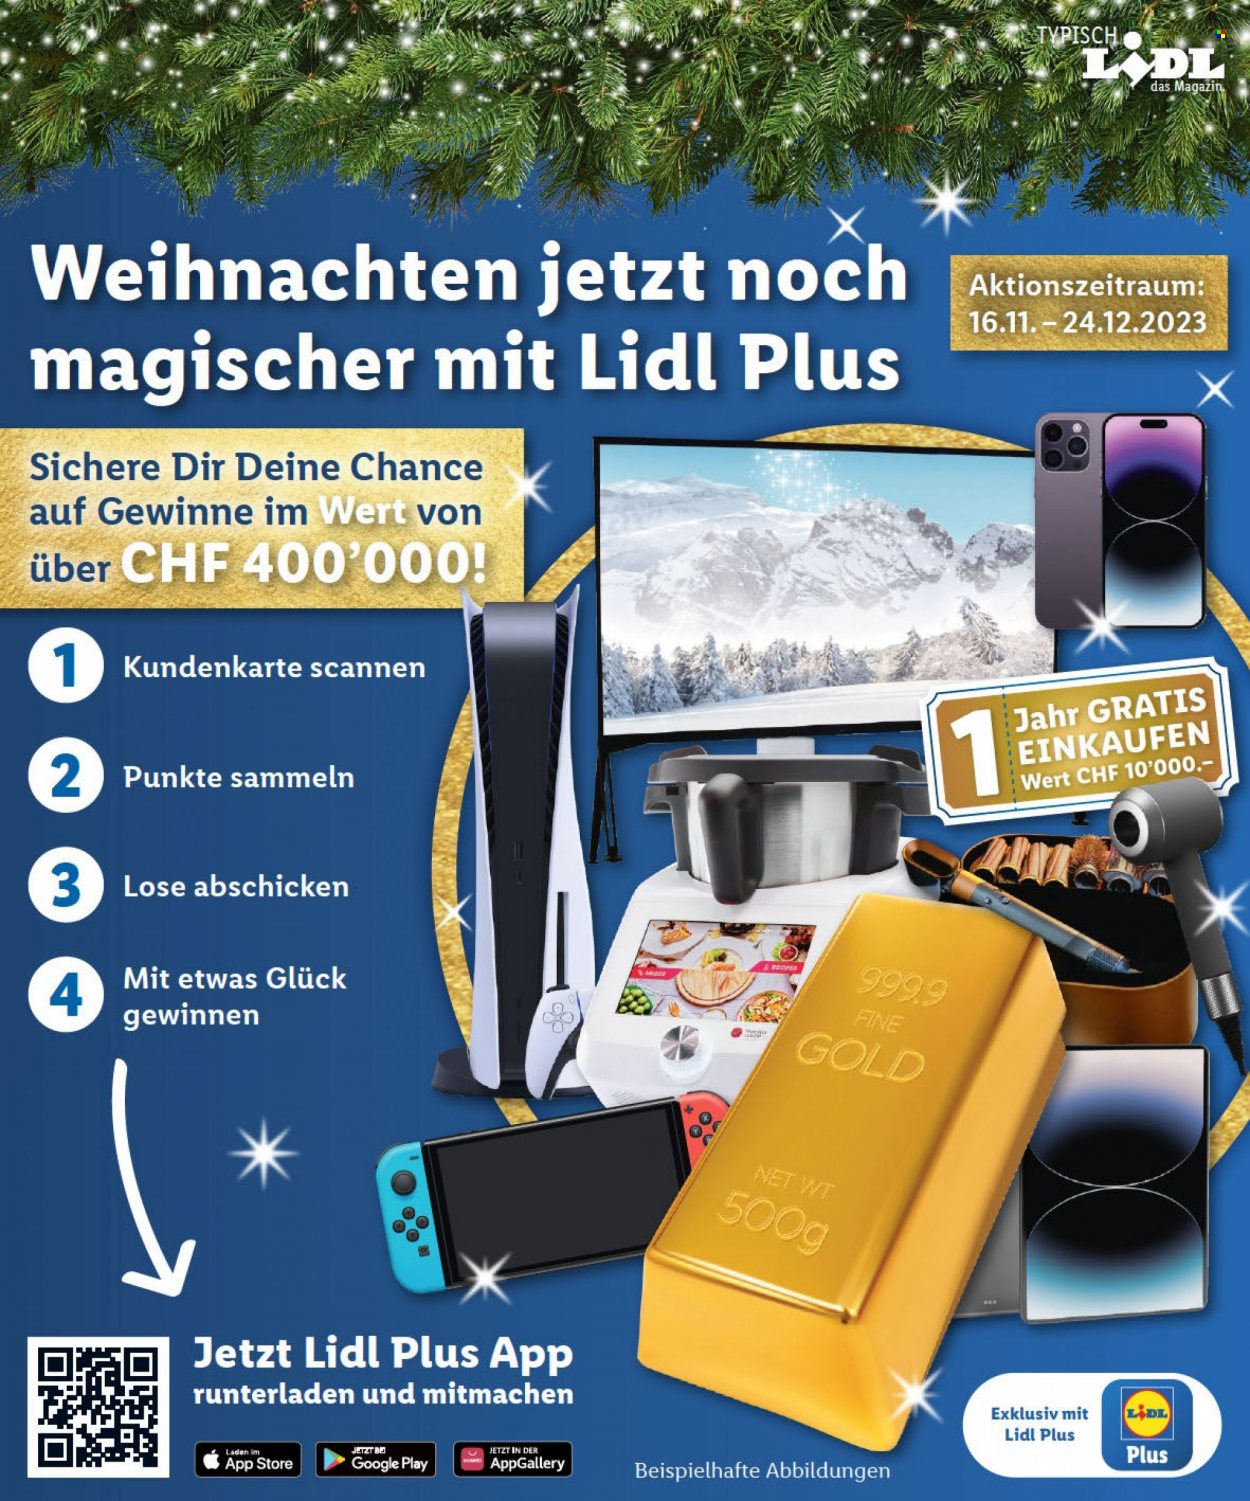 Catalogue Lidl. Page 40.